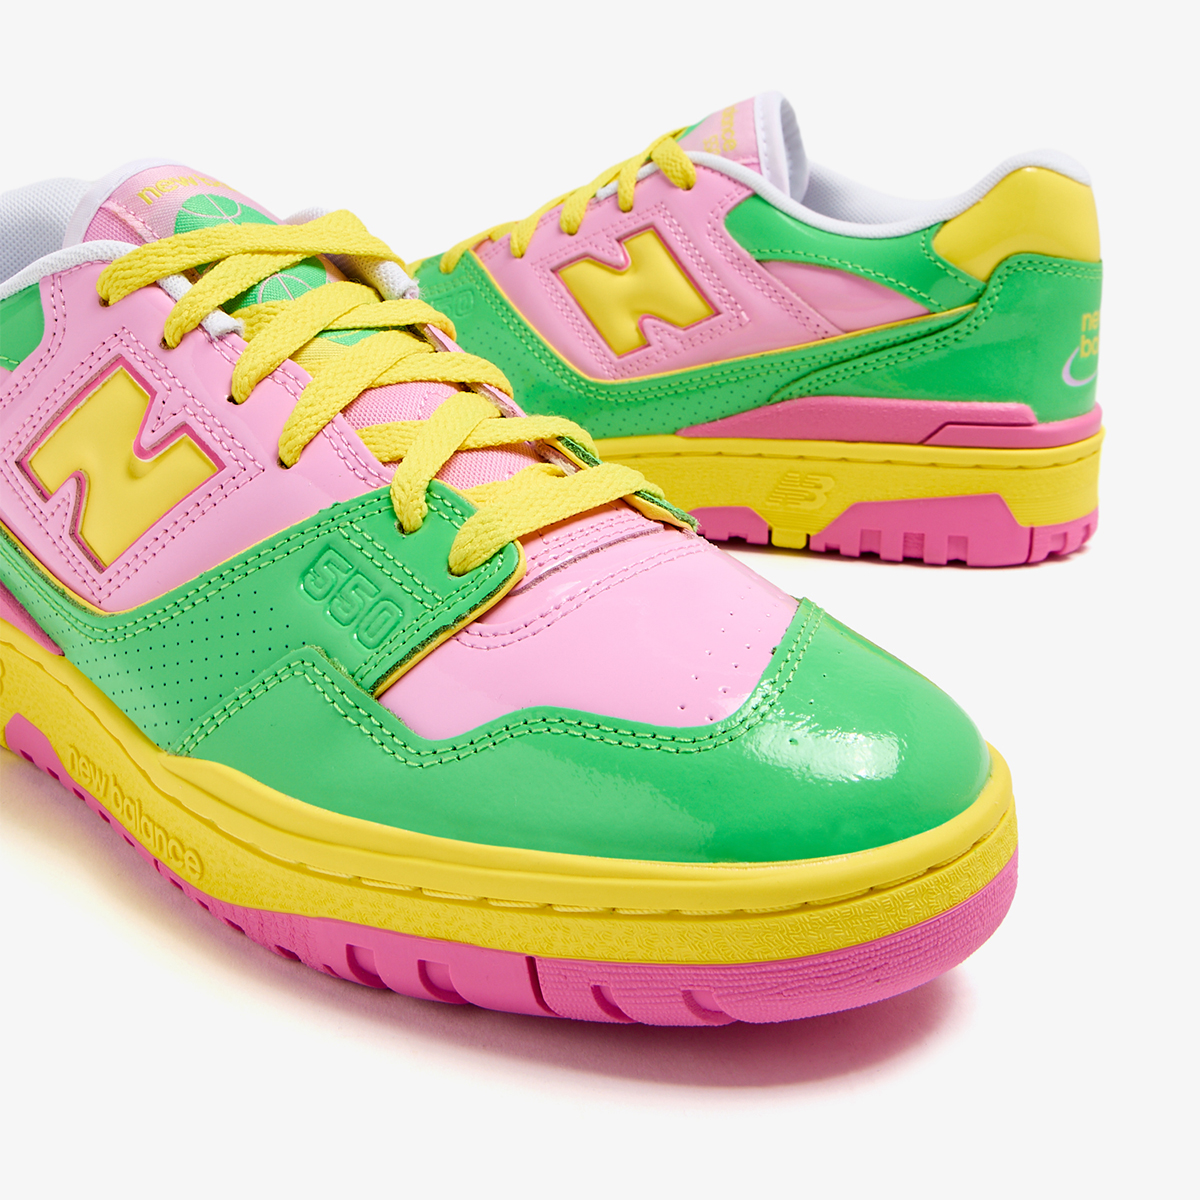 Halfcourt Heroics: A Well Timed "Cavs" adidas D.O.N. Issue #5 Appears Patent Green Yellow Pink Bb550yka 2